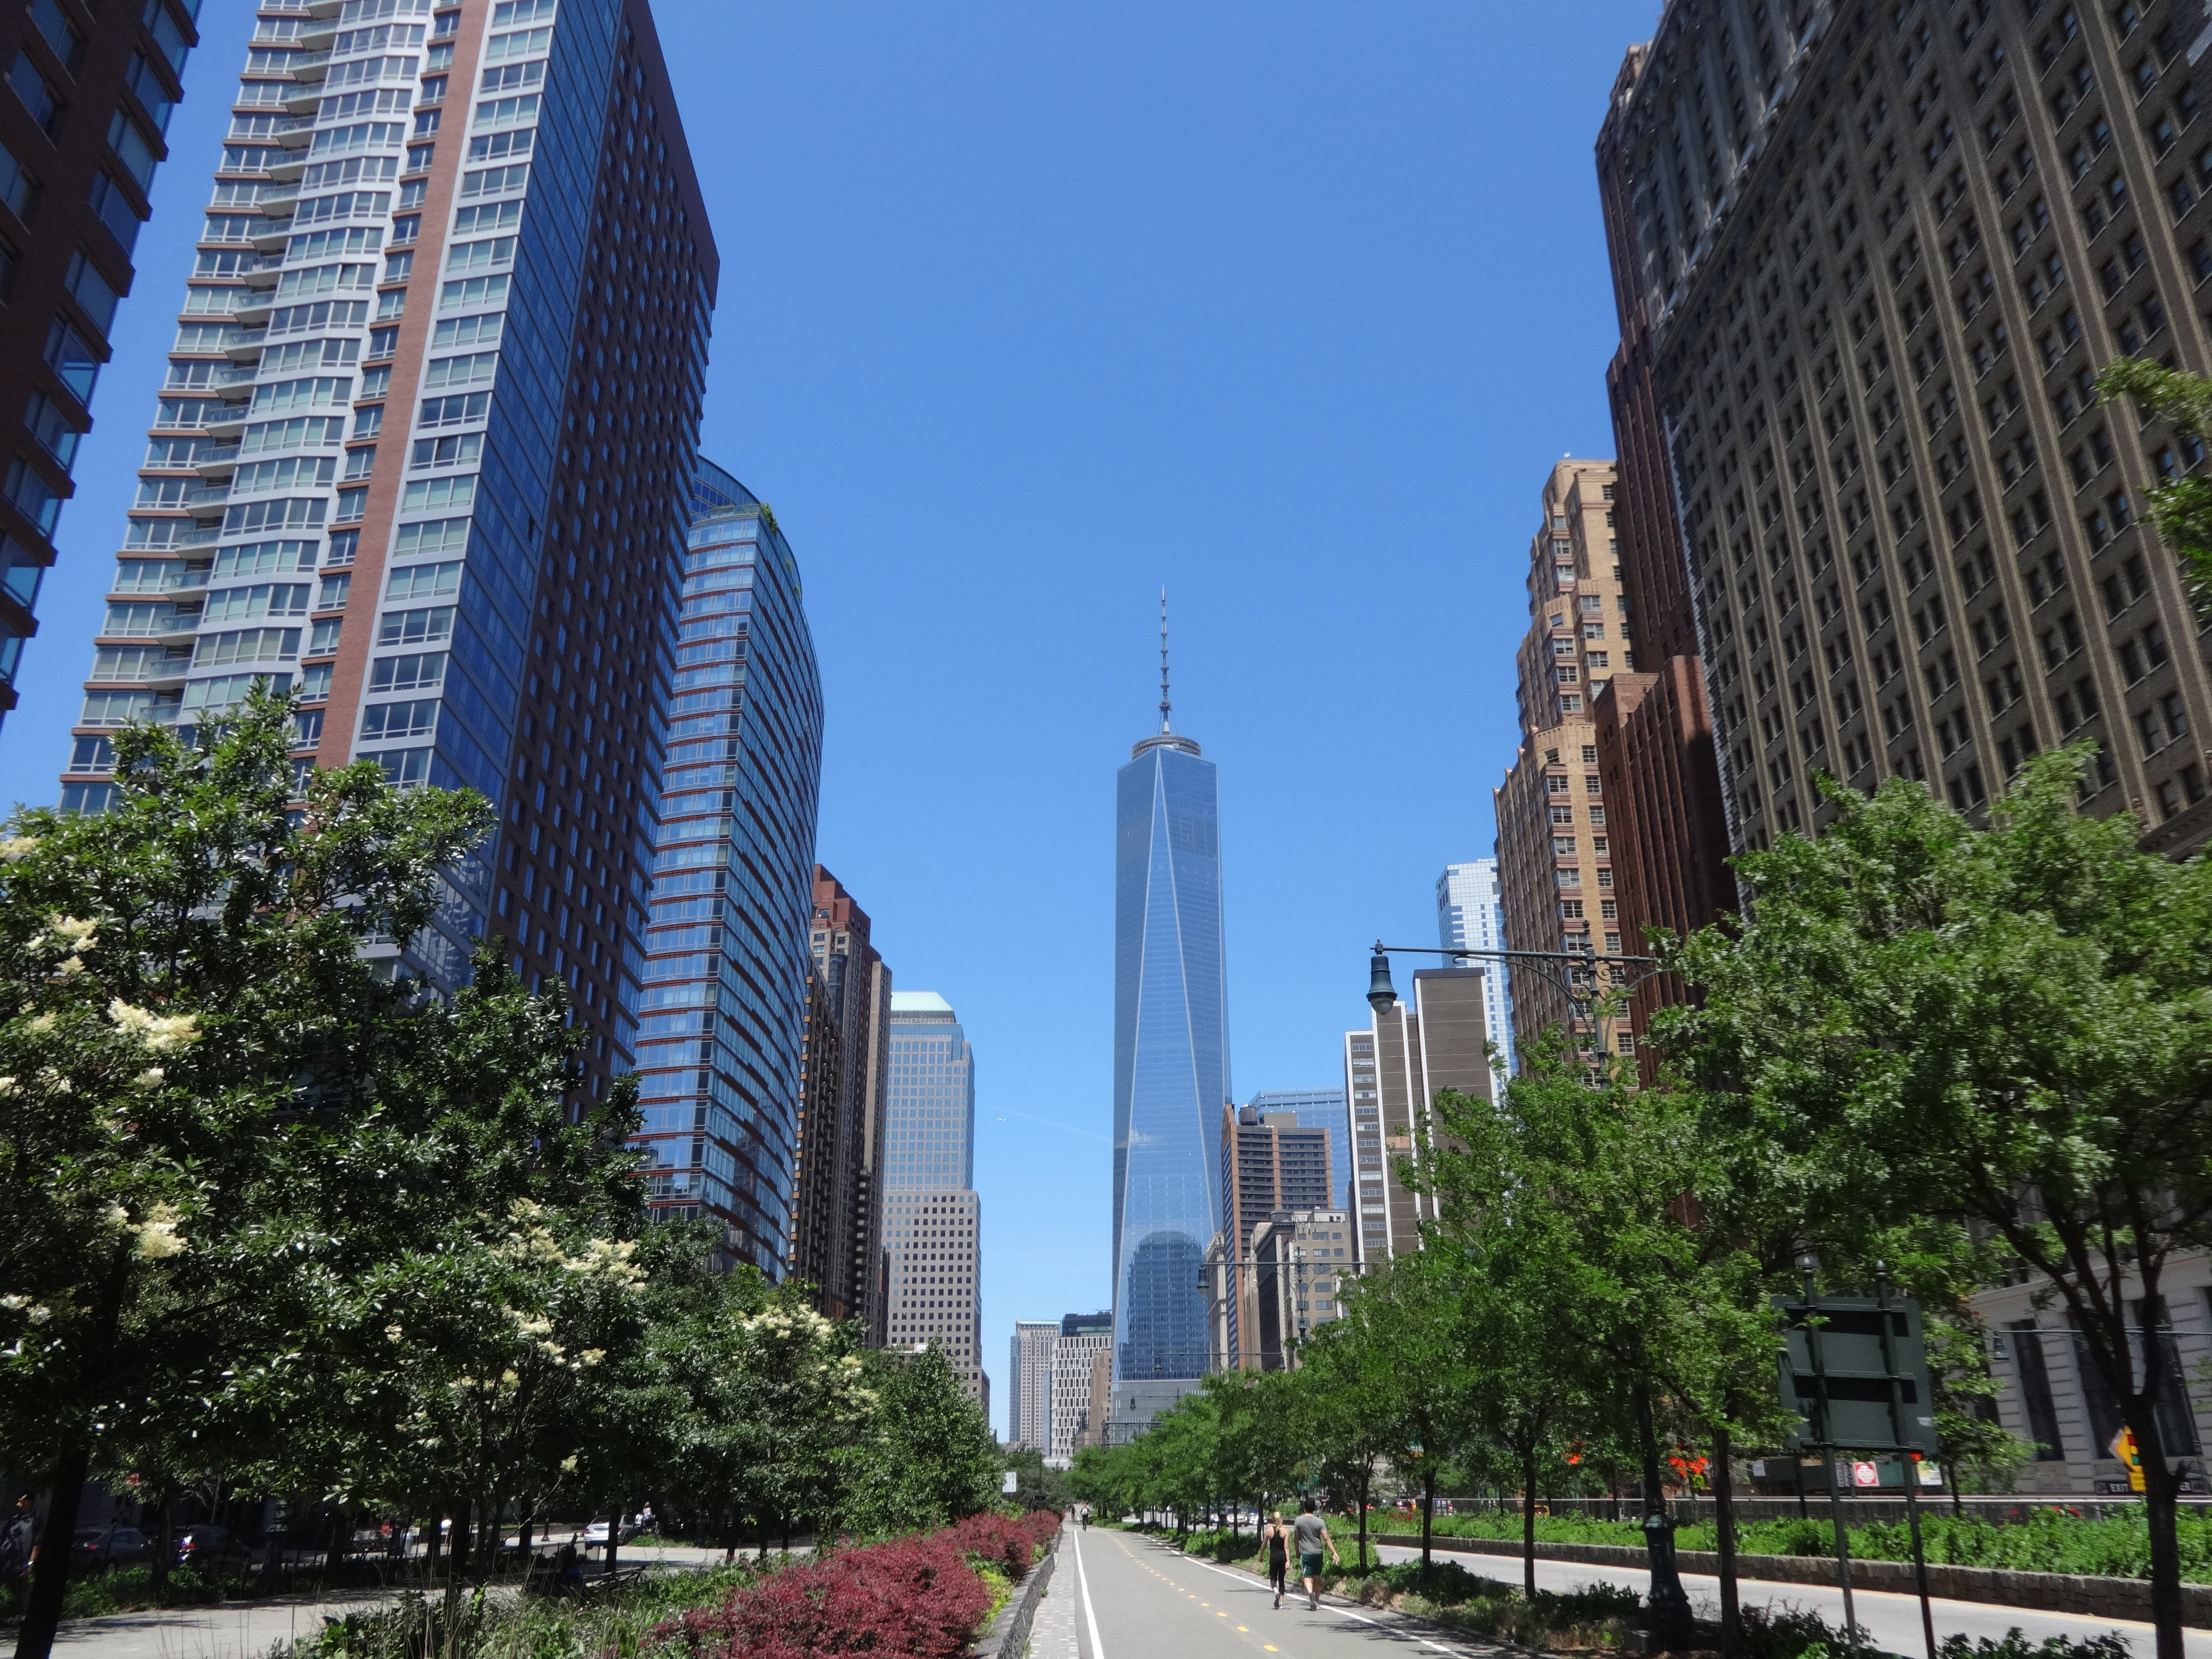 Freedom-Tower-and-canyon-of-apartments-in-BPC-6-15-2014